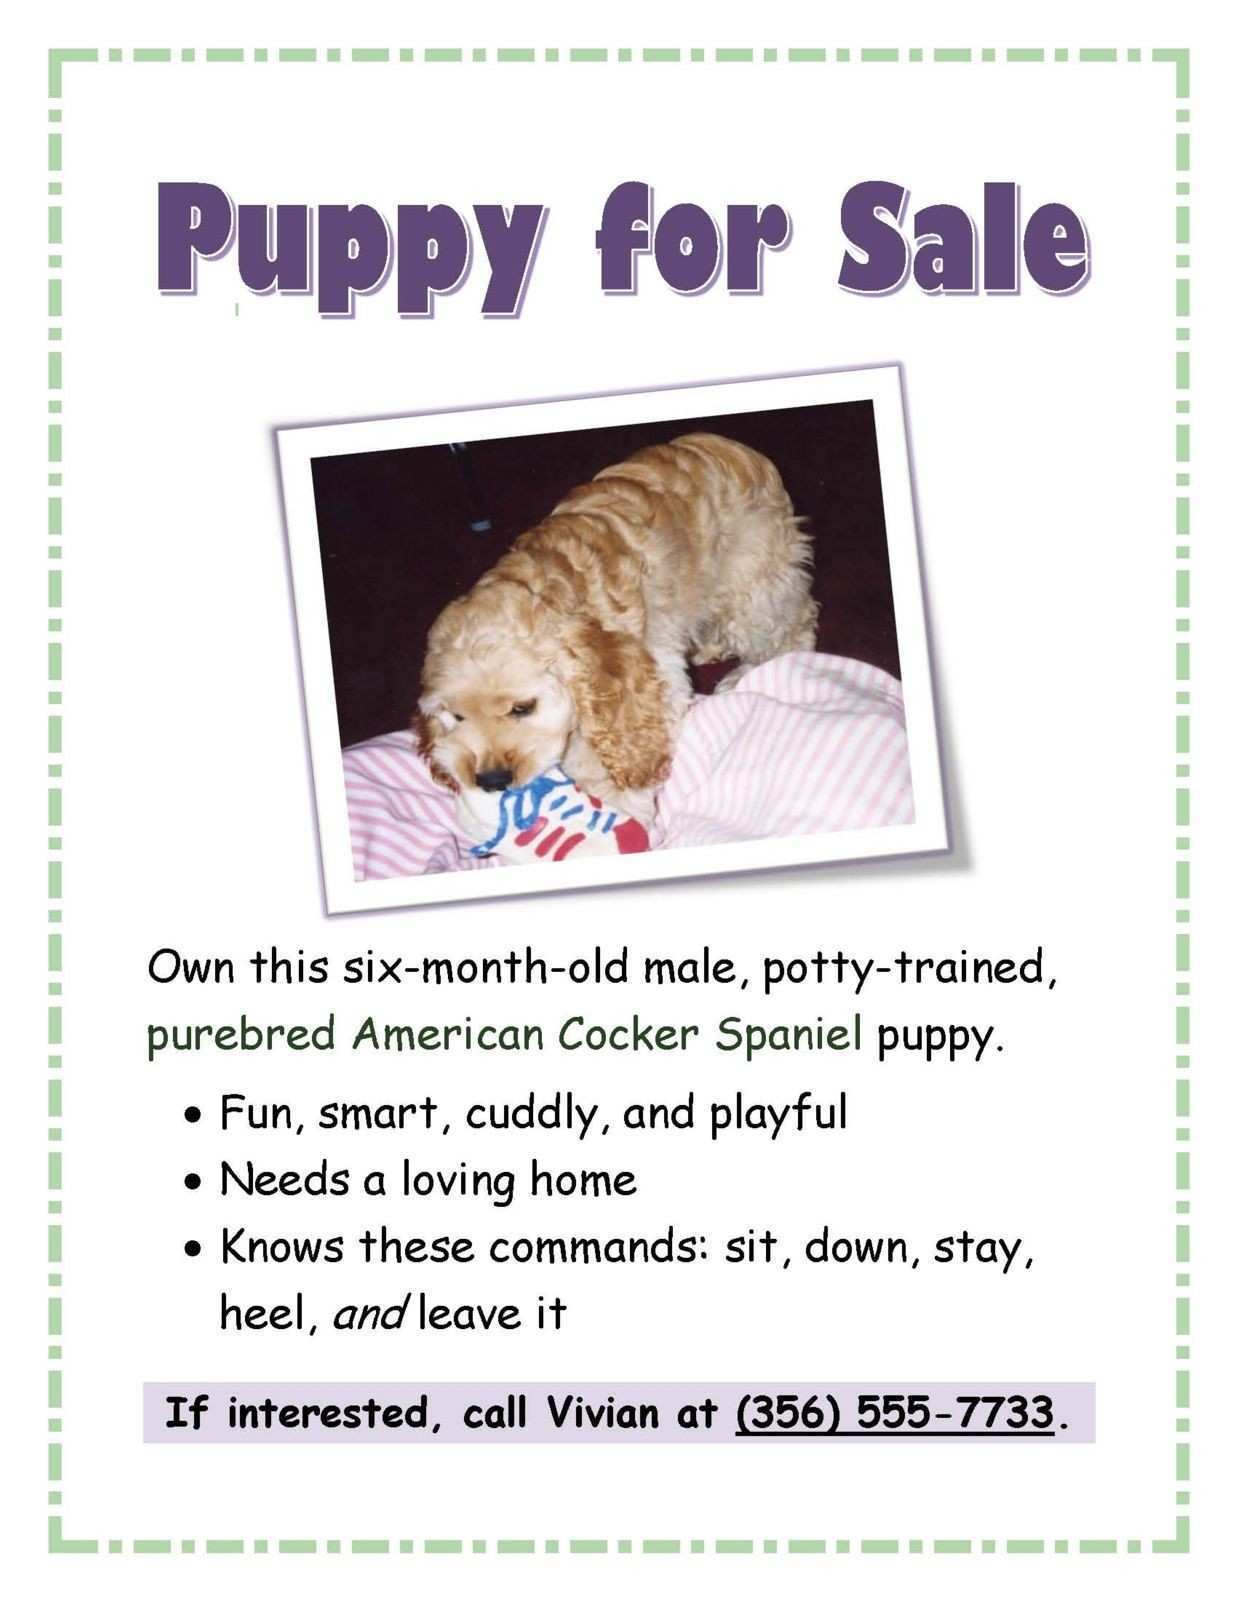 10 Online Puppy For Sale Flyer Templates Download With Puppy For  For Puppies For Sale Flyer Template